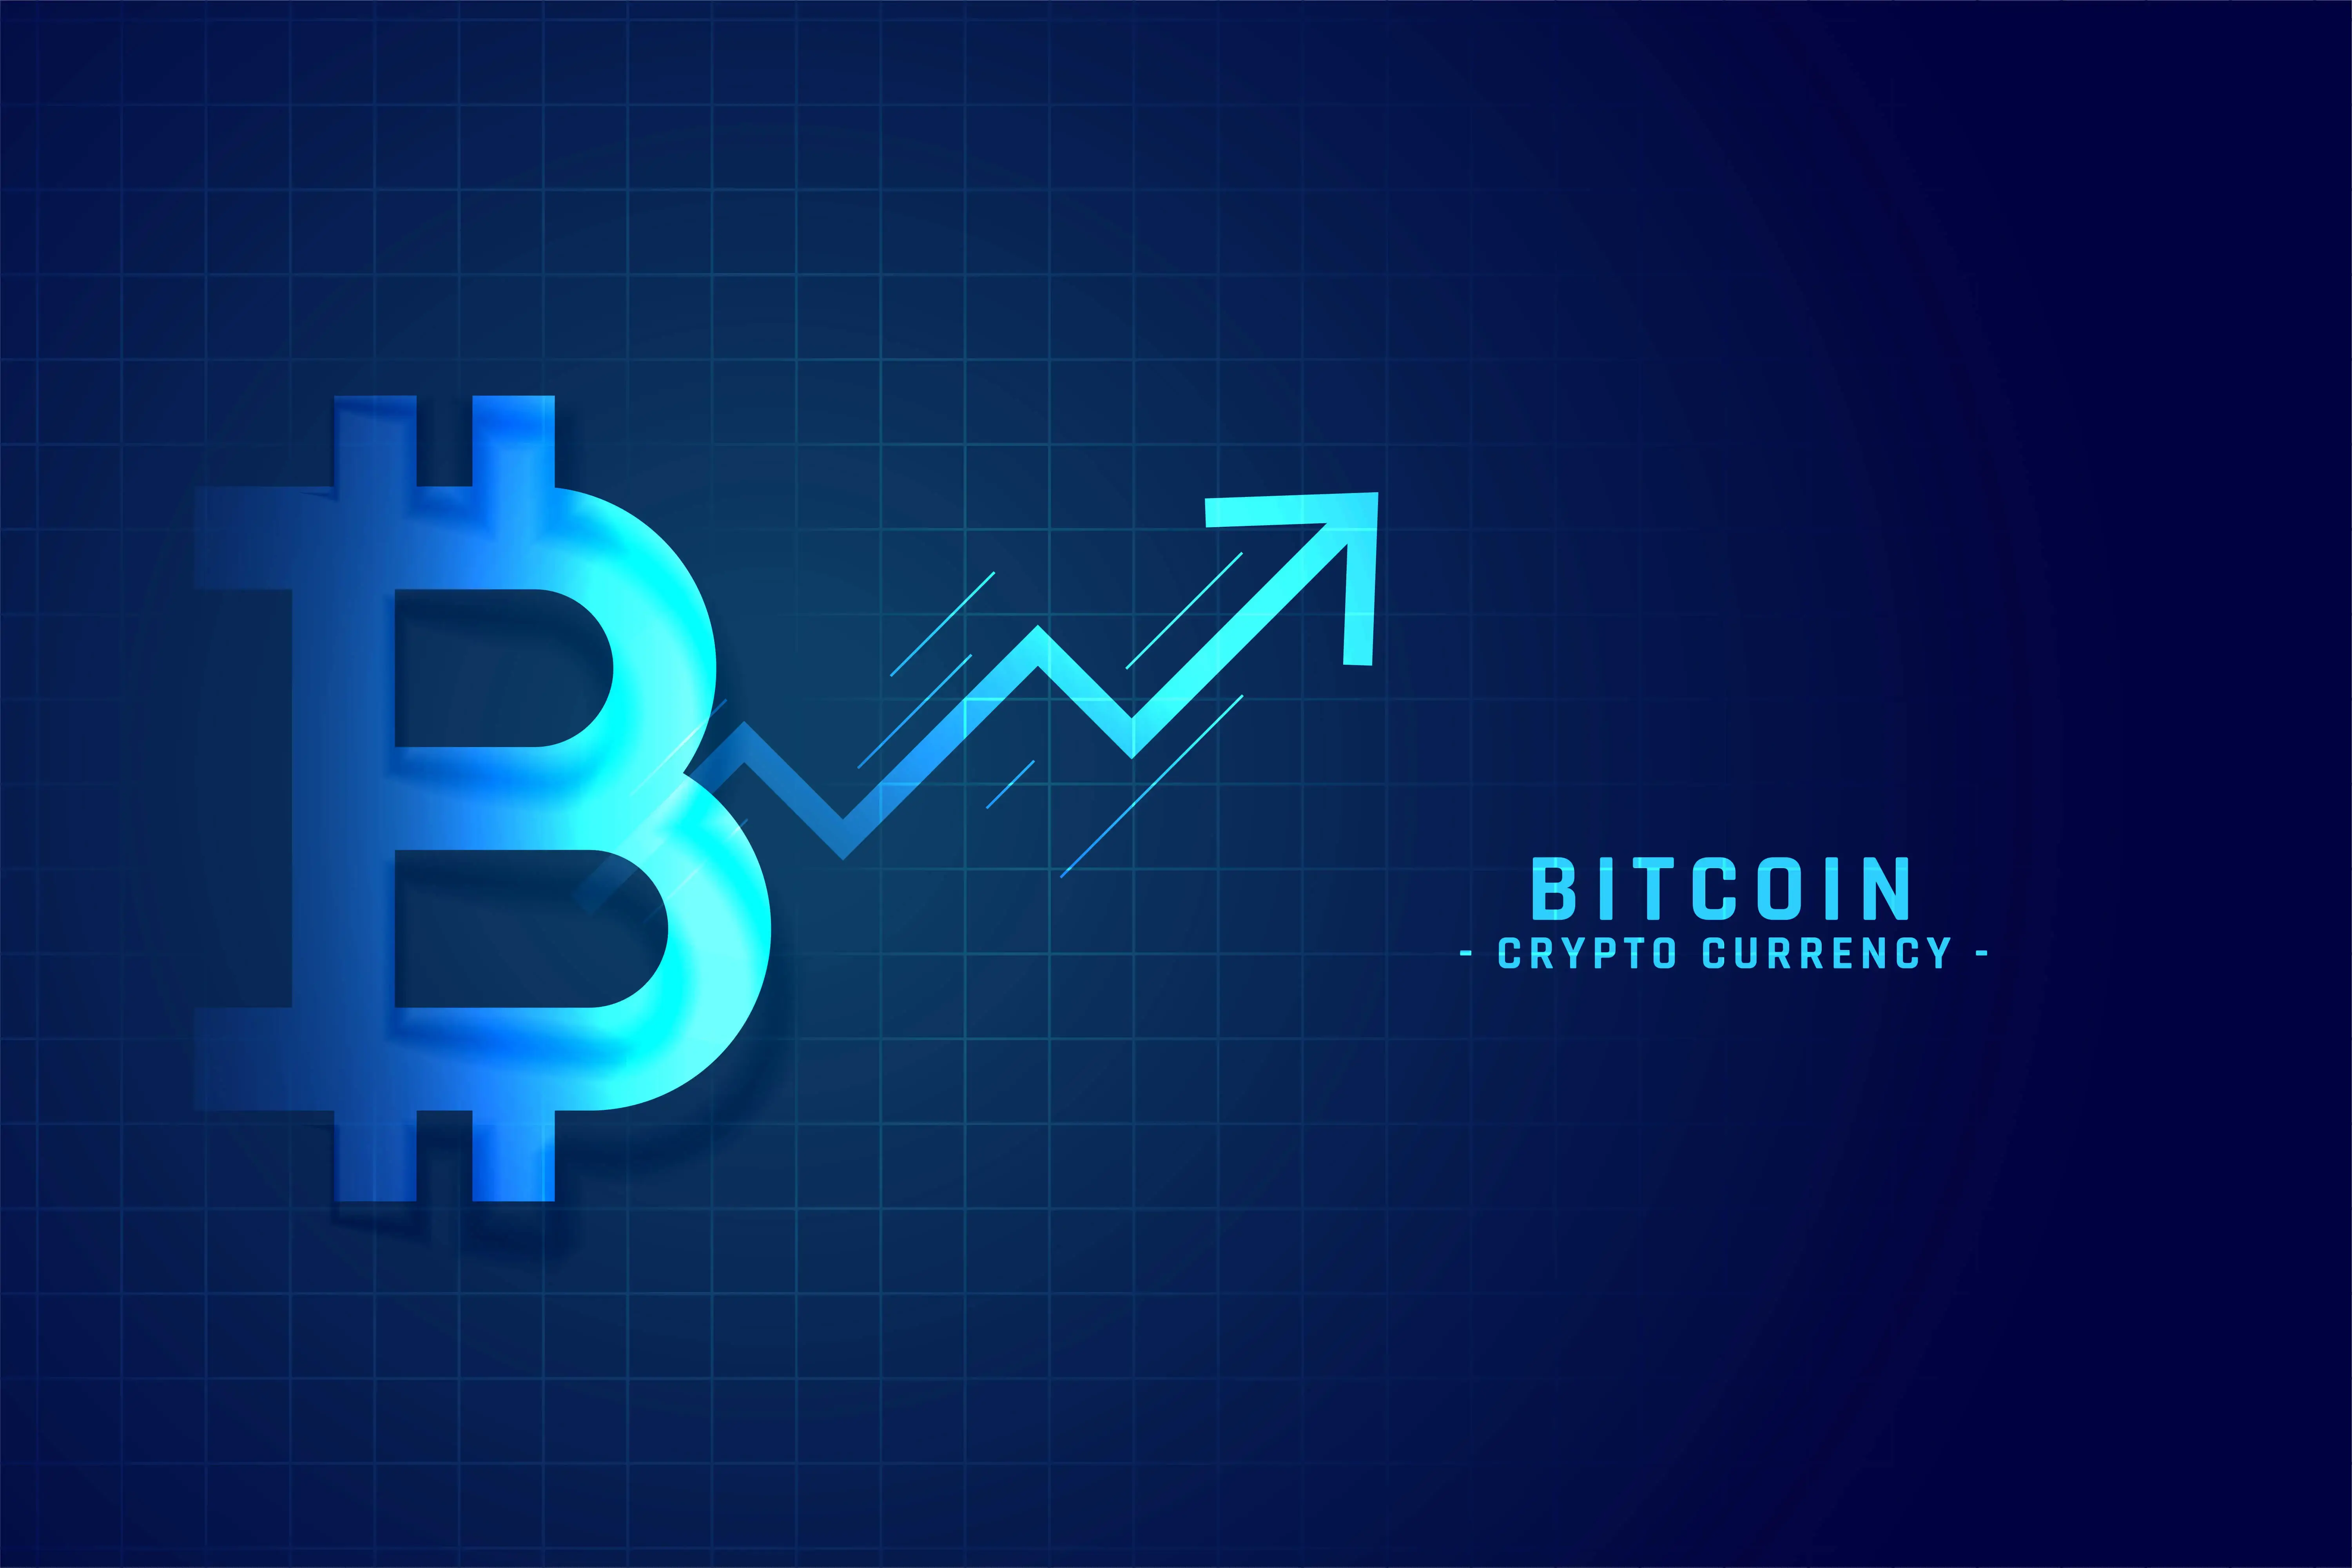 Bitcoin and Other Cryptos Showed some gain in Weekend Trading